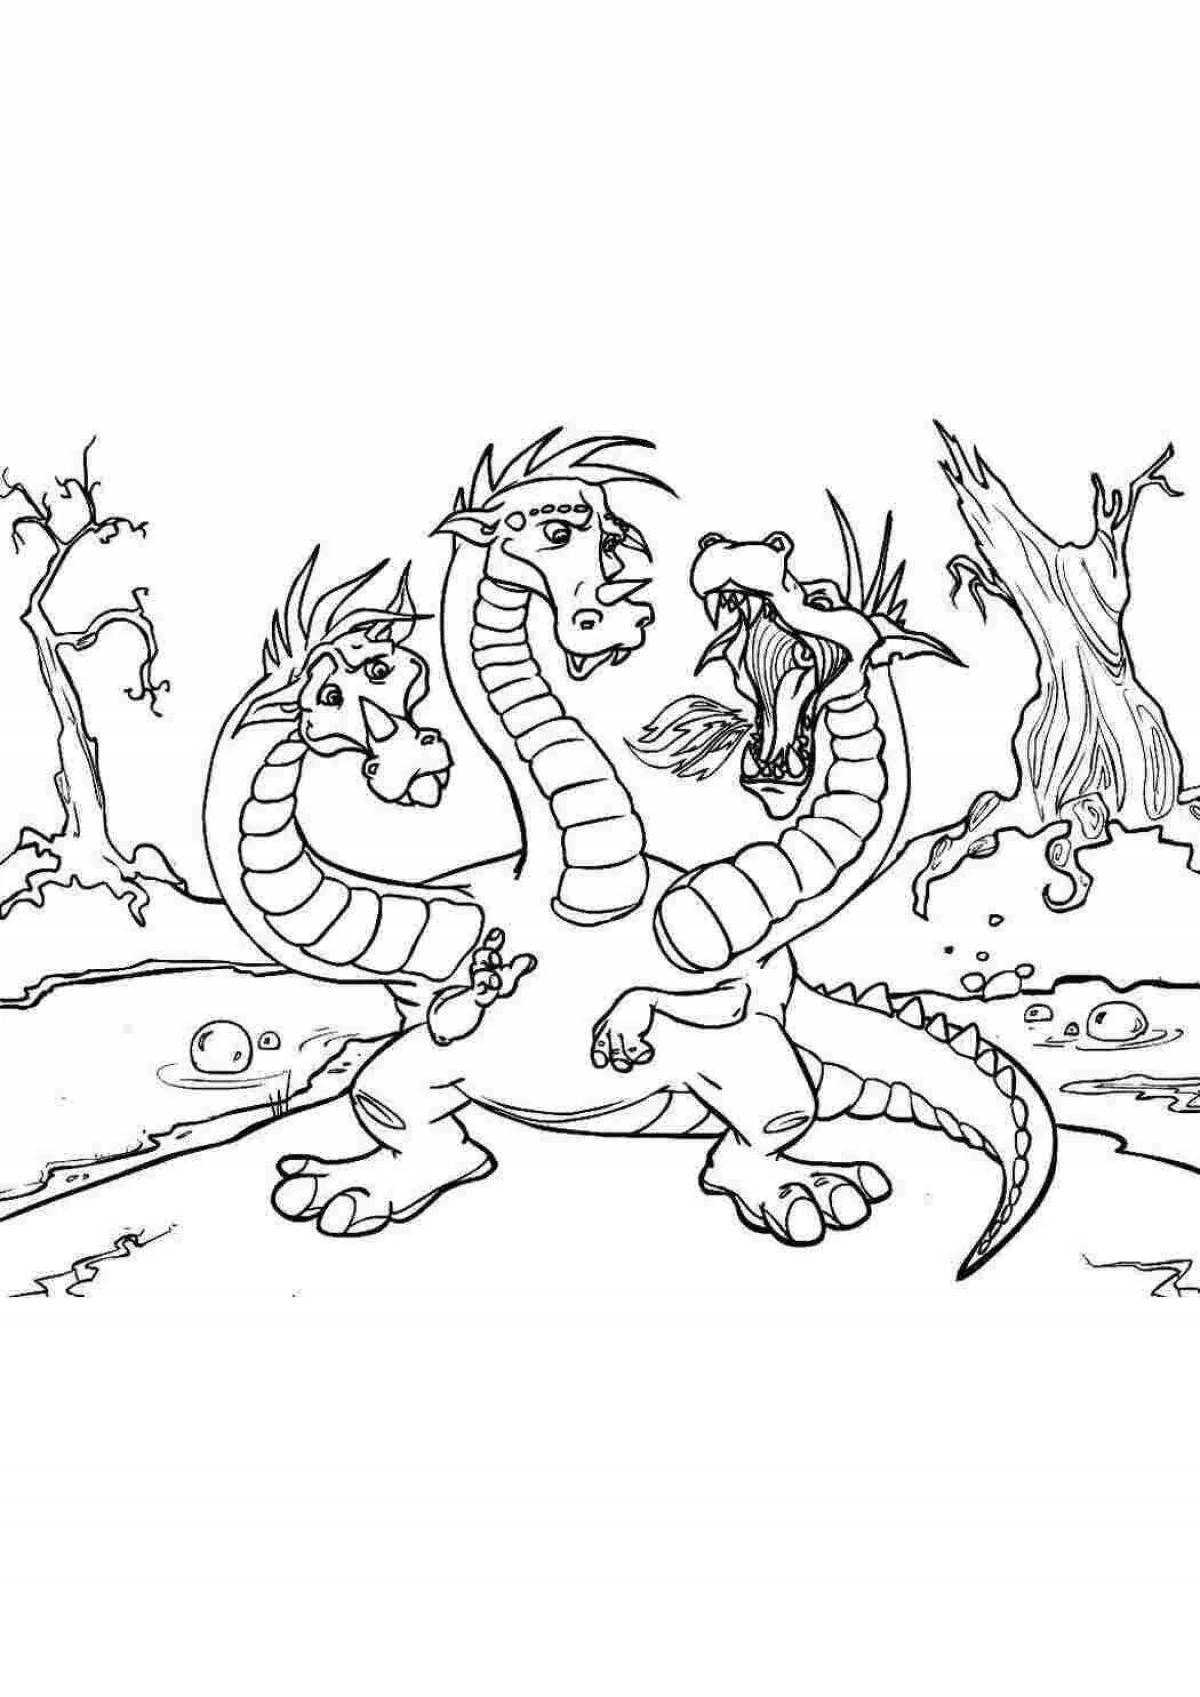 Coloring page striking six-headed serpent